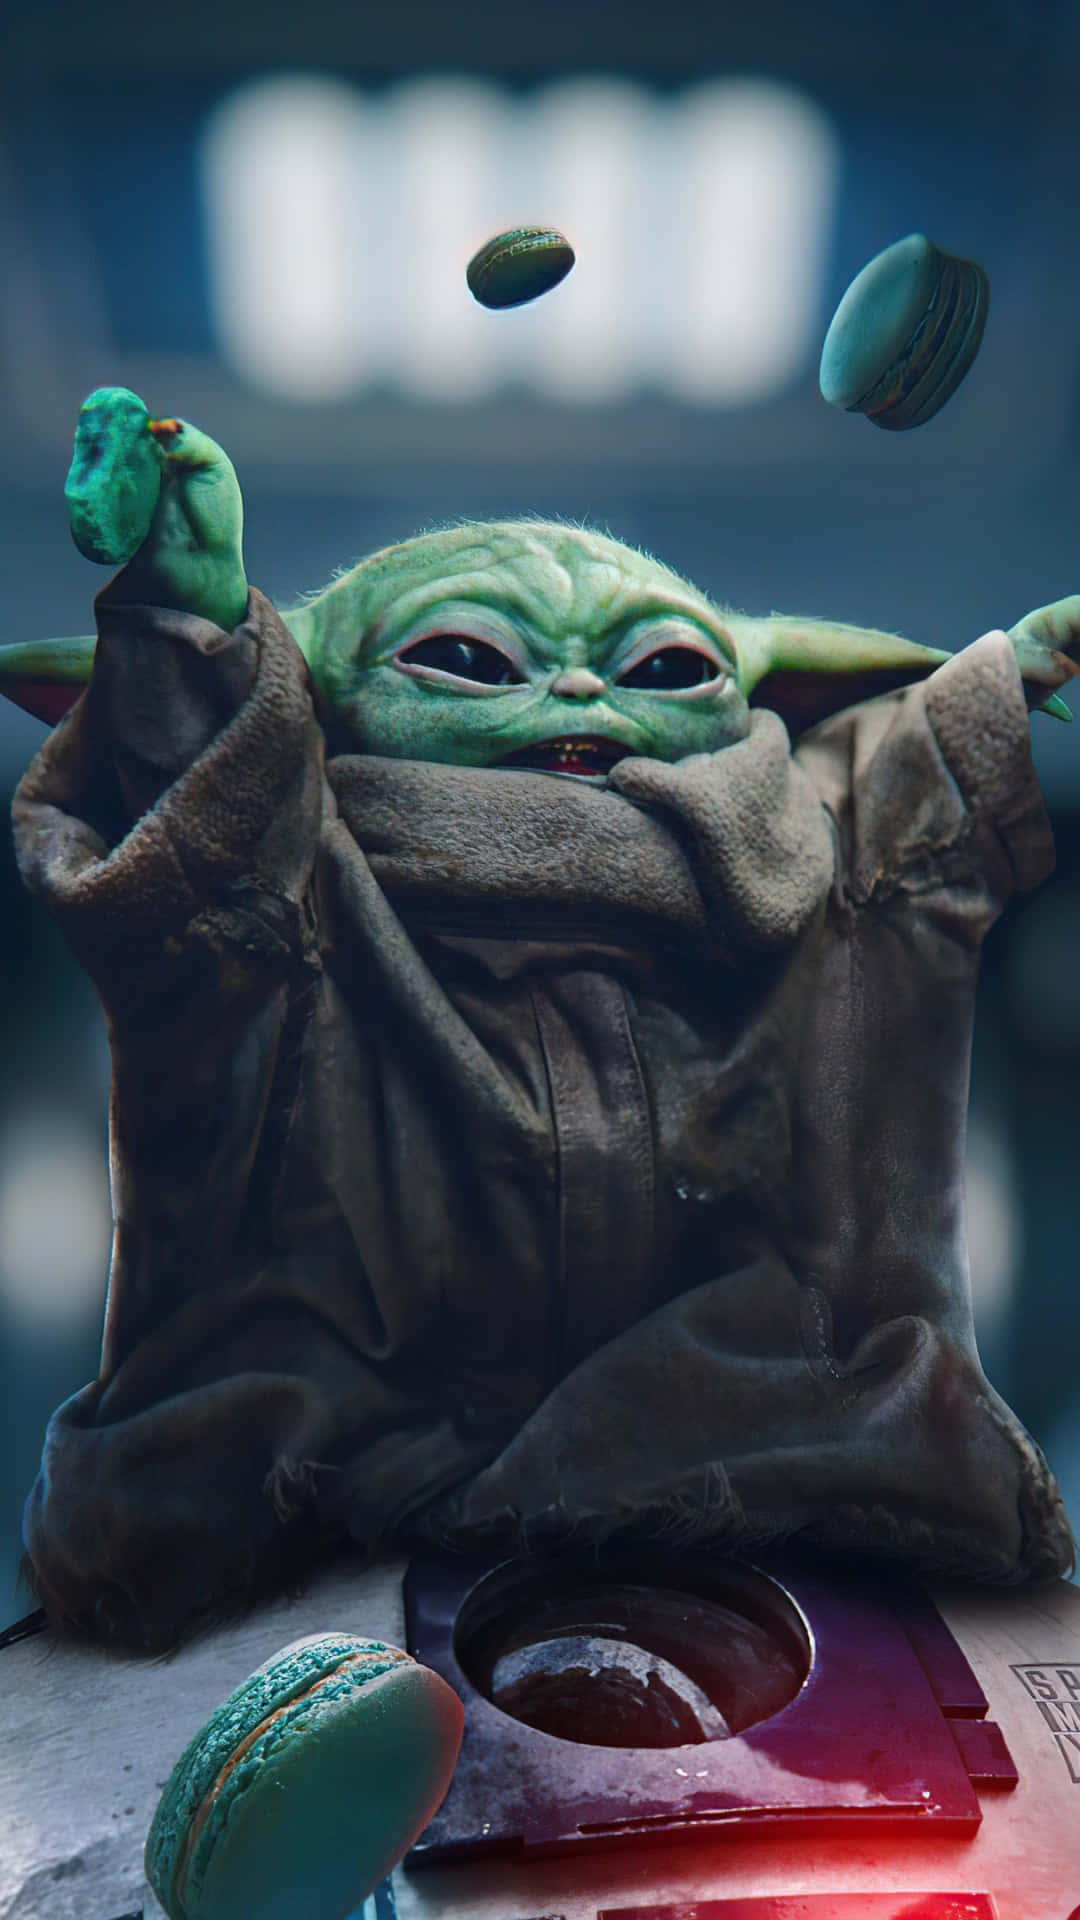 Image  Feel the power of the force when you accessorize with a Baby Yoda Phone! Wallpaper